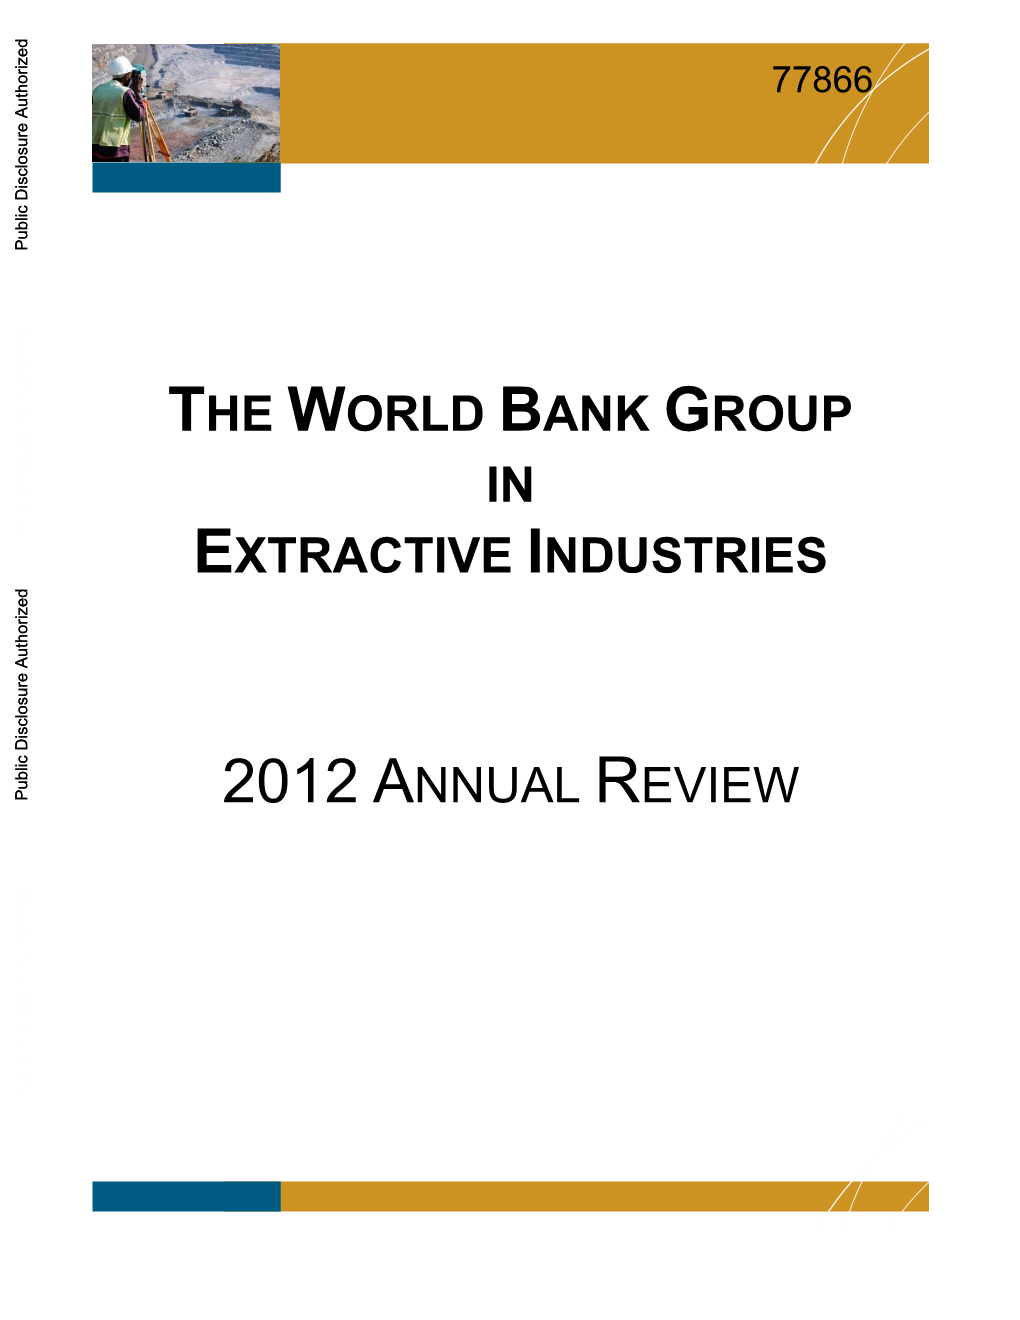 The World Bank Group in Extractive Industries